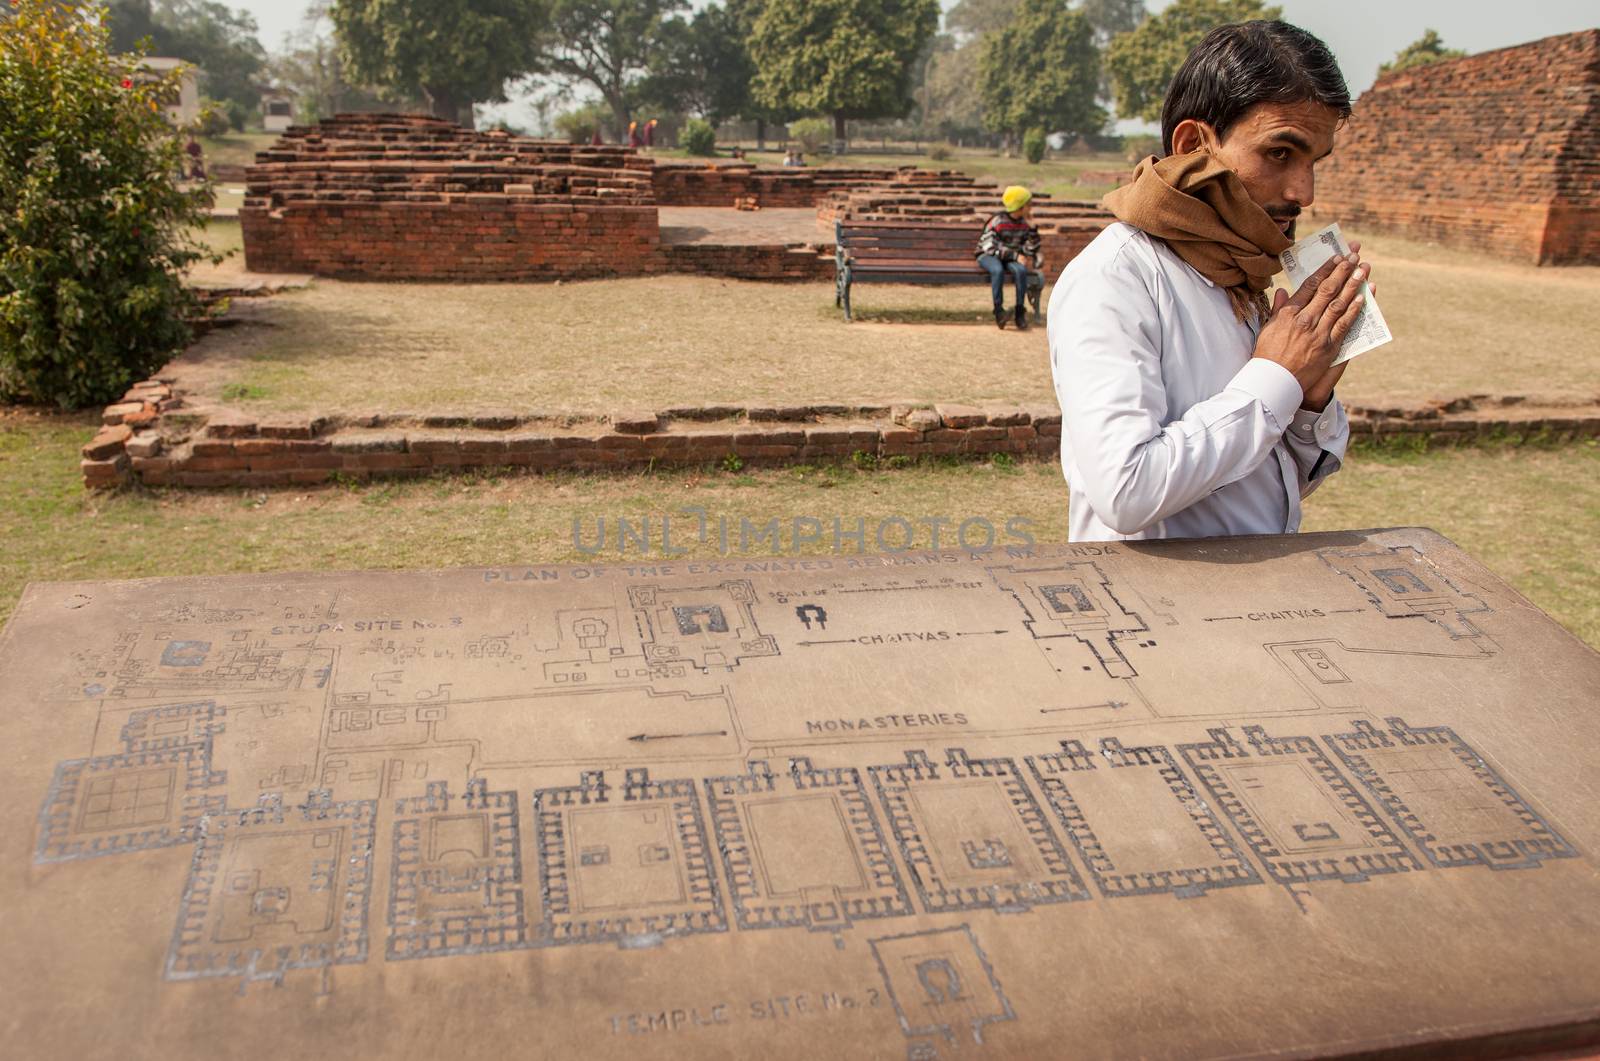 Archaeological heritage of India, ruins of university of Nalanda on February 2, 2014. At a stone with the scheme of excavation, the Indian guide has earned reward.